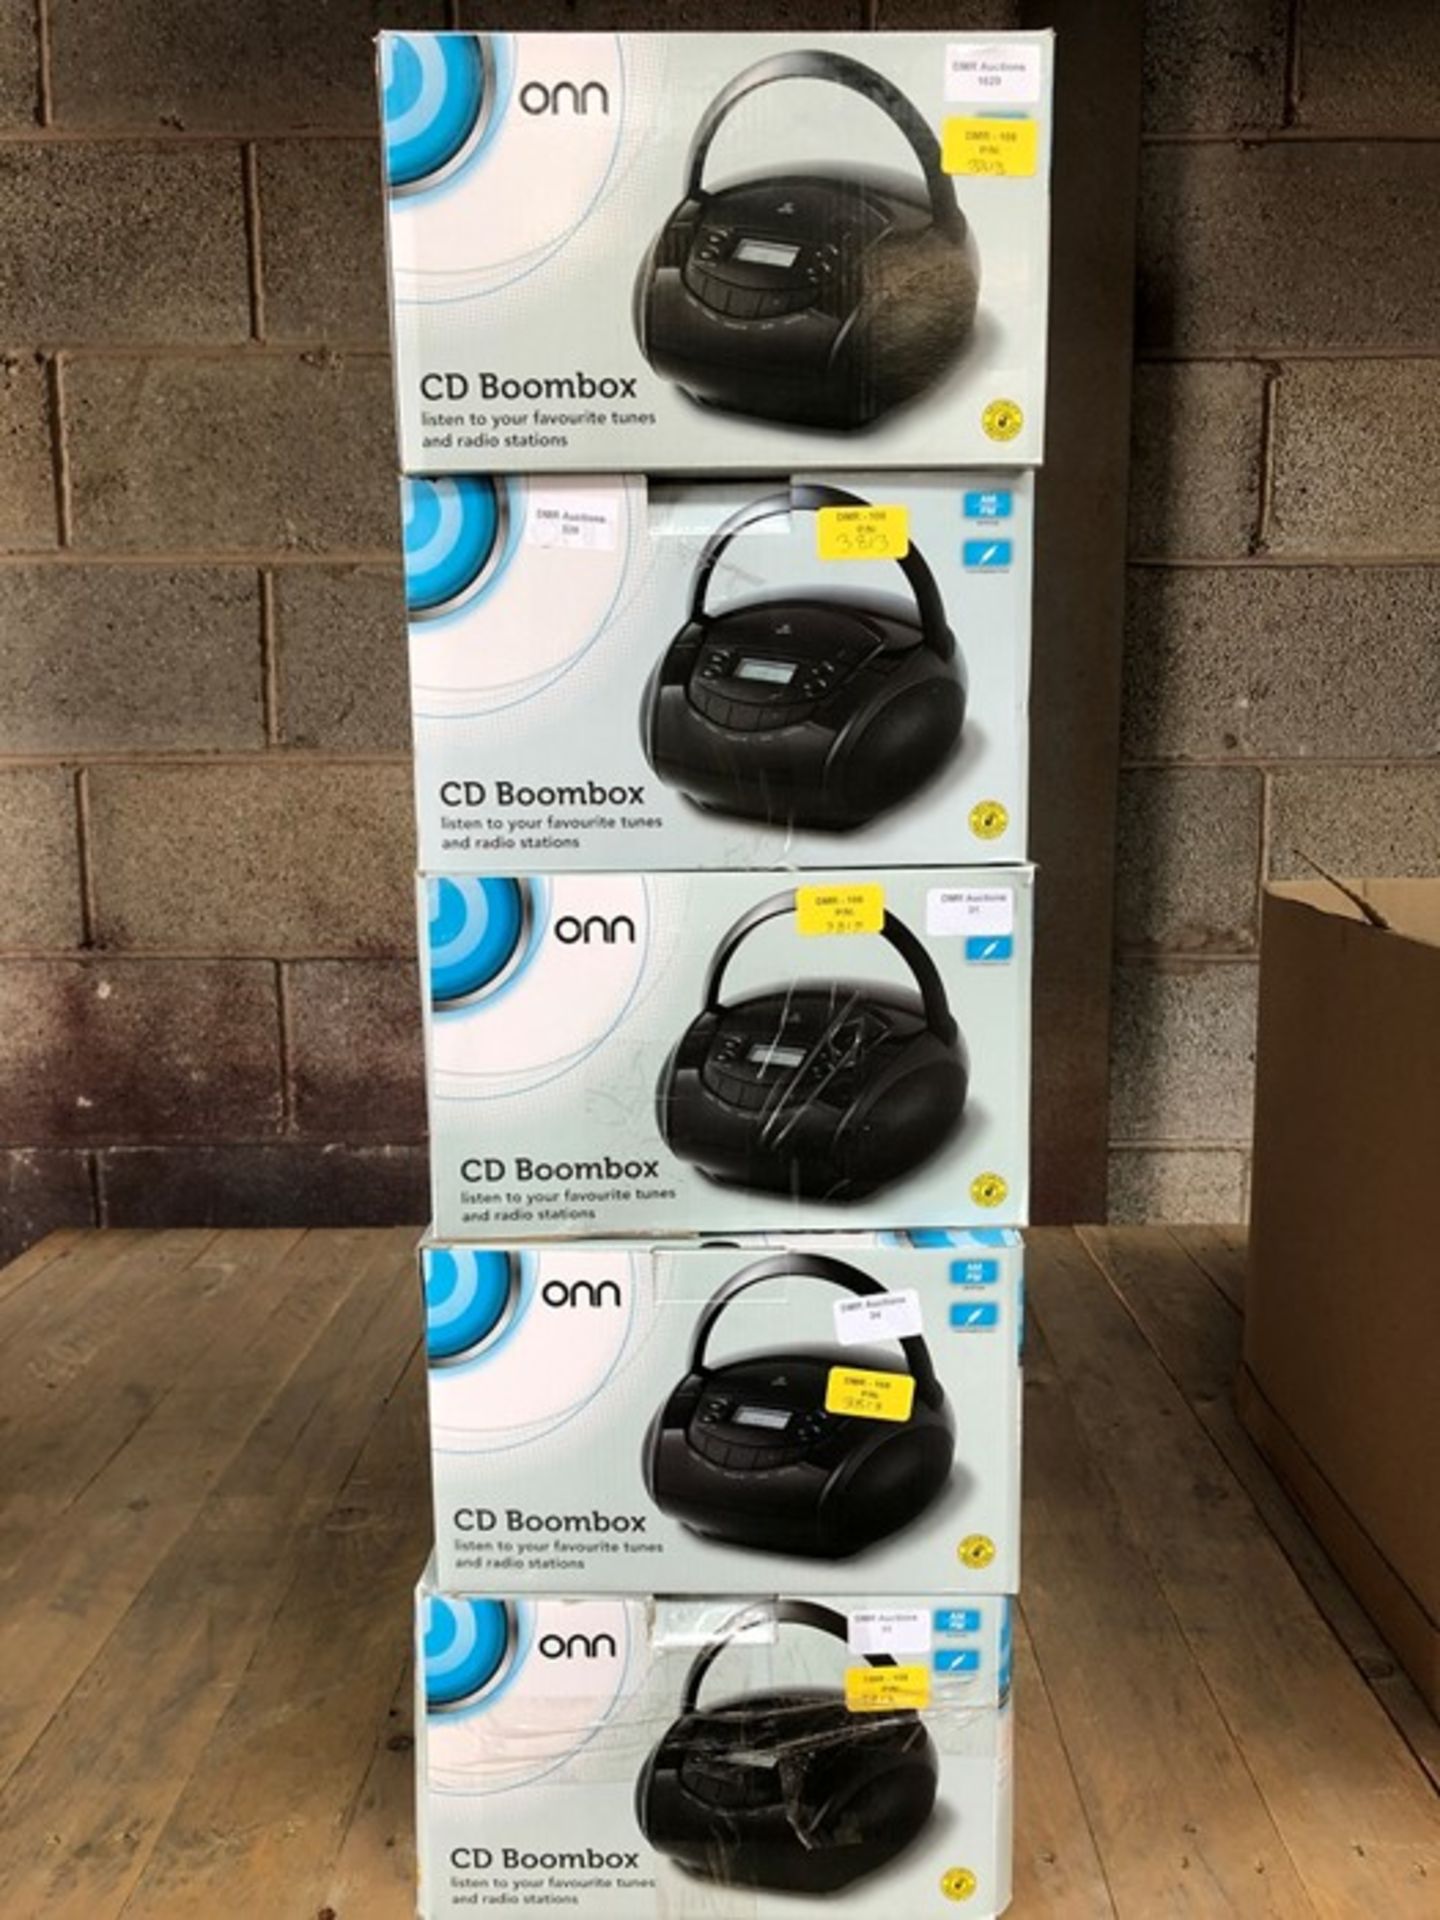 1 LOT TO CONTAIN 5 ASSORTED ELECTRICALS, INCLUDES 5 ONN BLACK BOOMBOXES / BL - 3813 (VIEWING